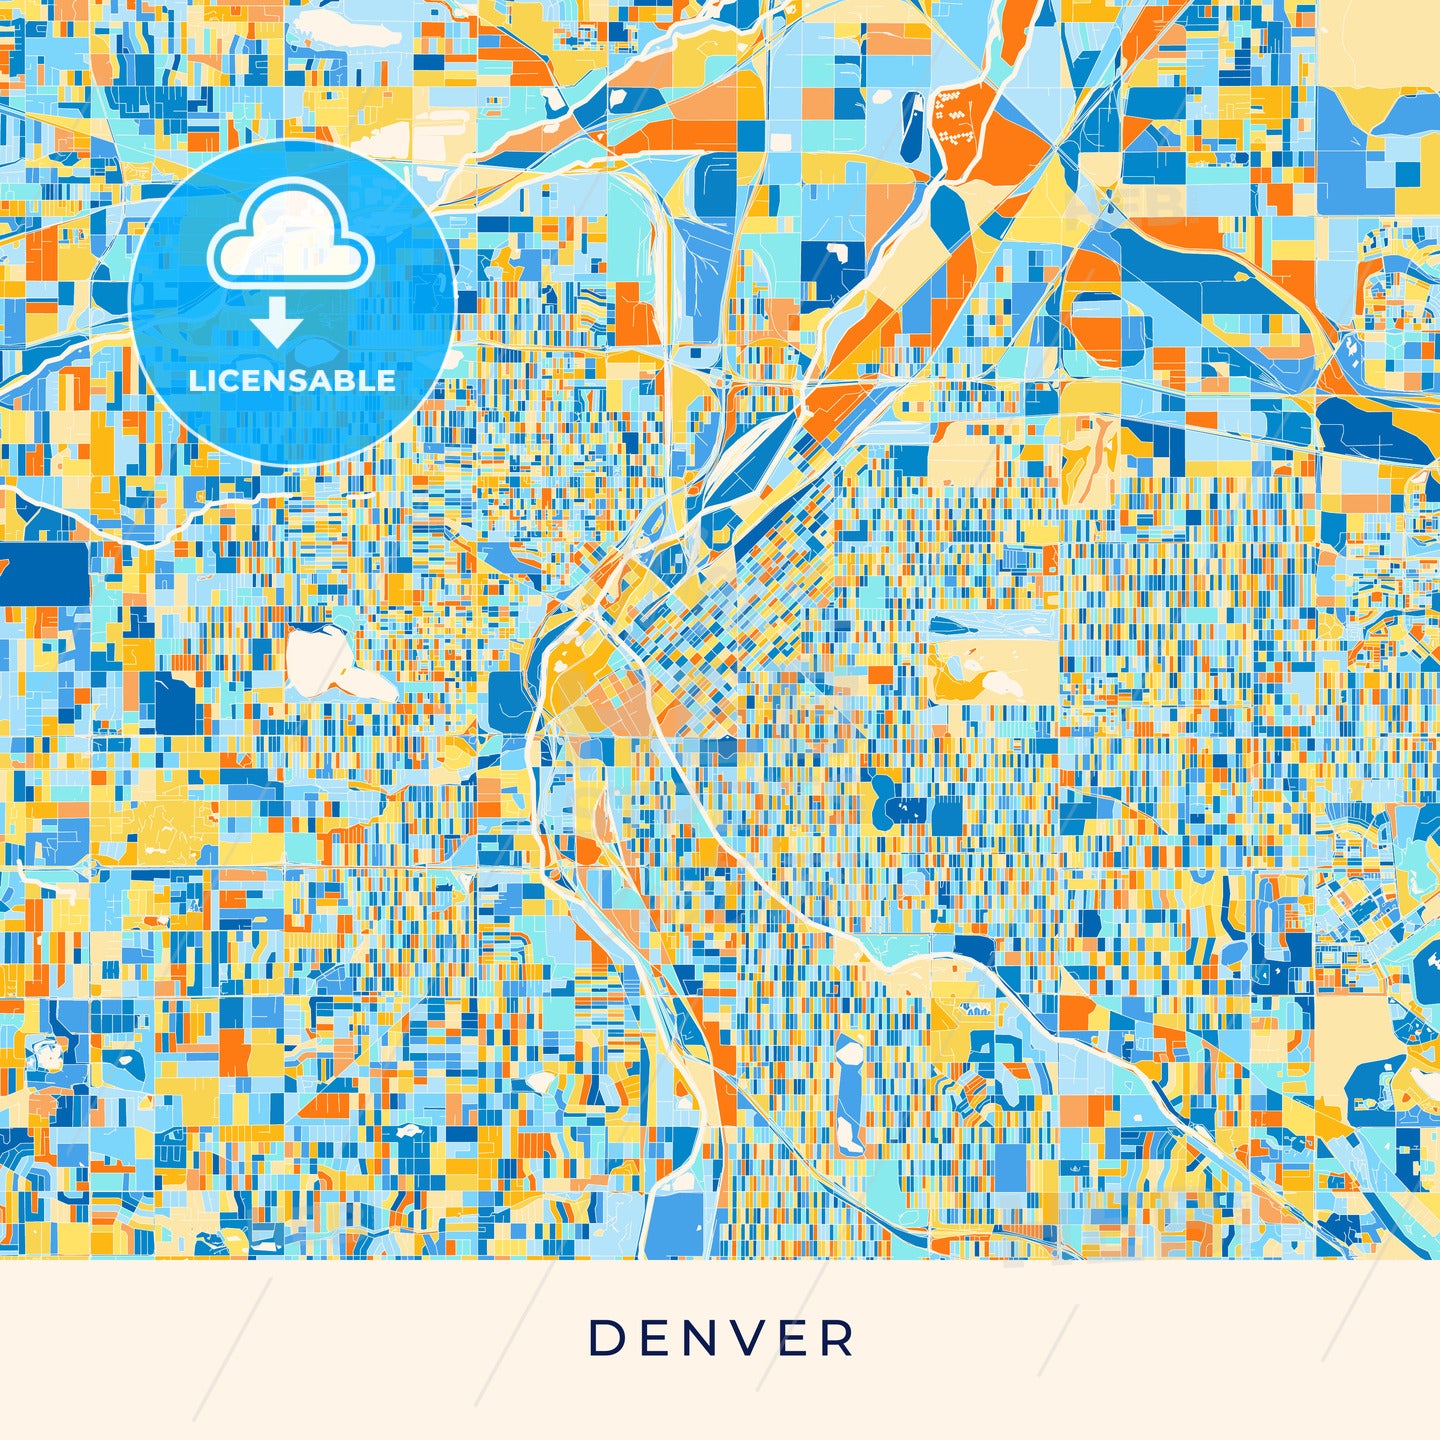 Denver colorful map poster template